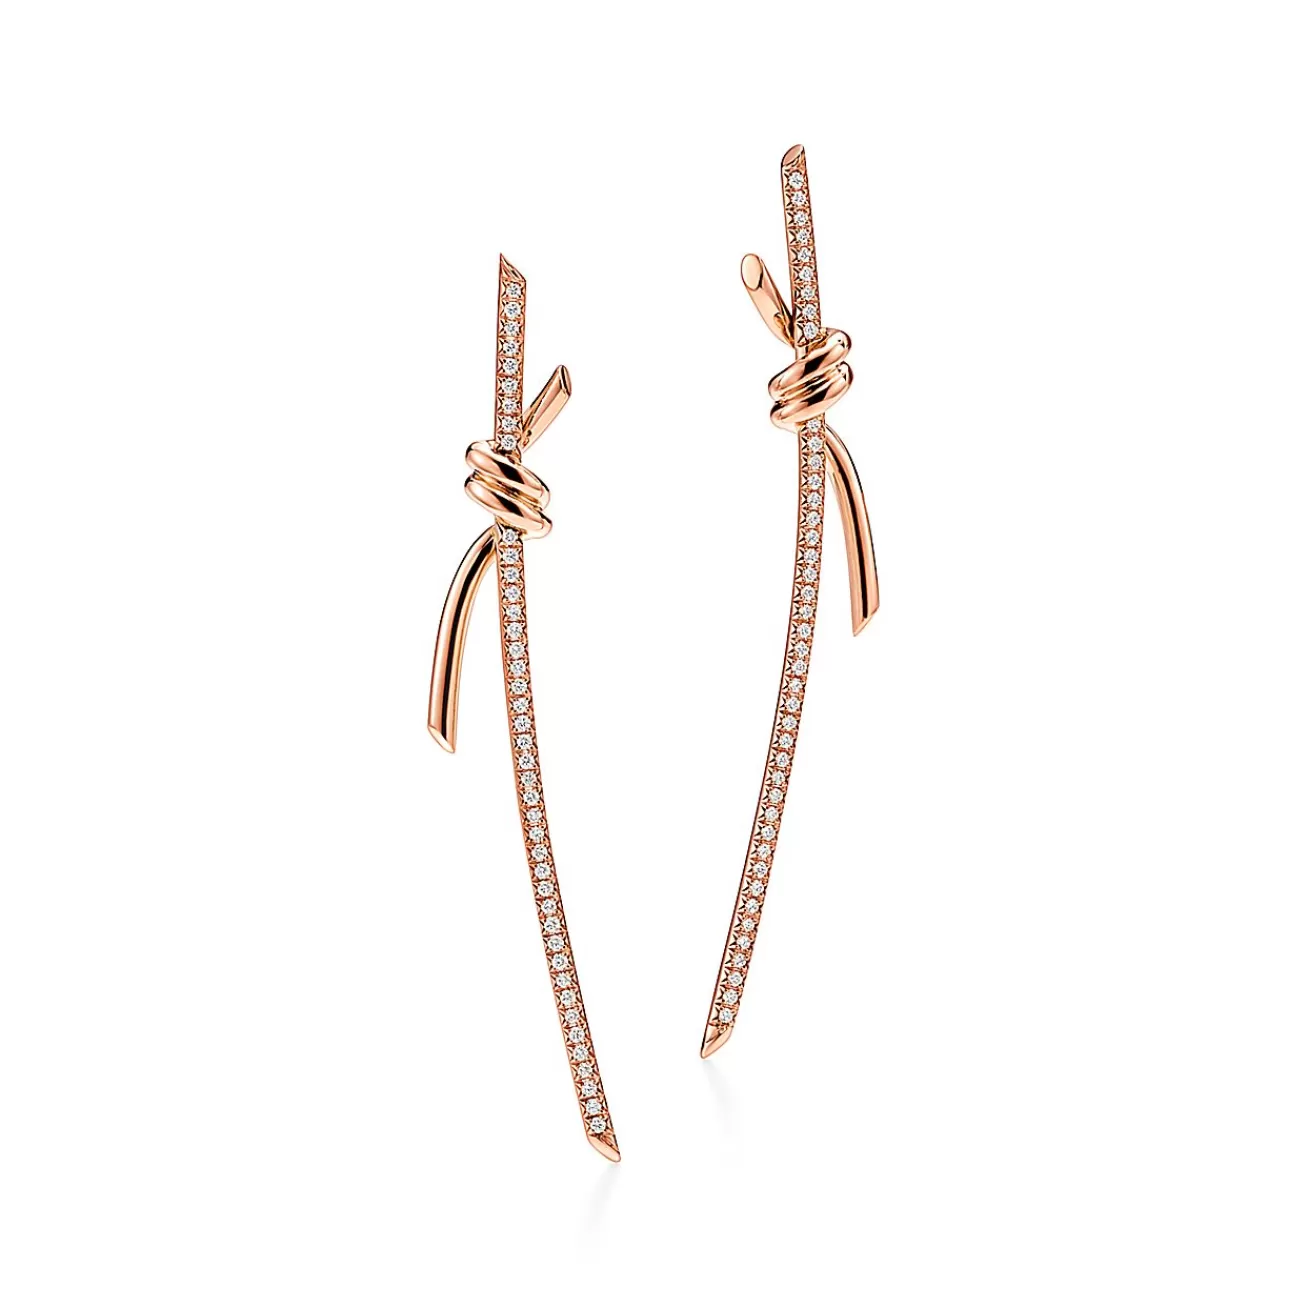 Tiffany & Co. Tiffany Knot Drop Earrings in Rose Gold with Diamonds | ^ Earrings | Rose Gold Jewelry